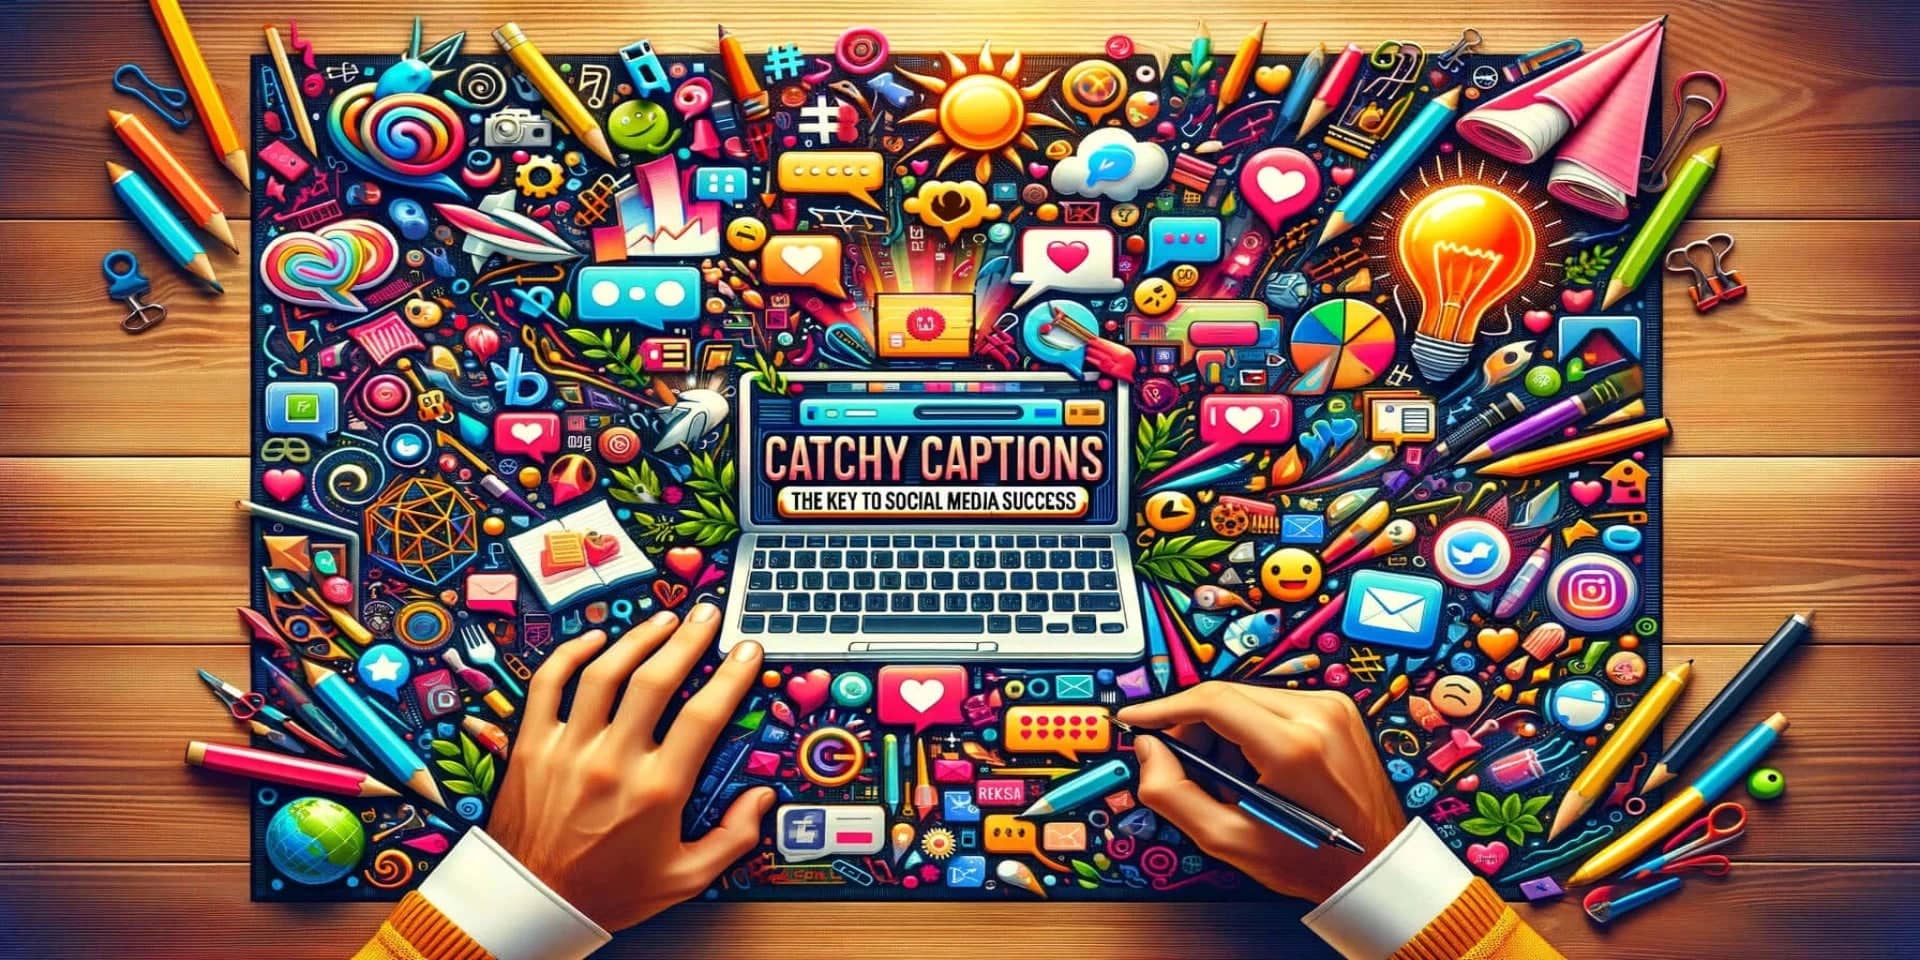 We will create catchy captions for social media